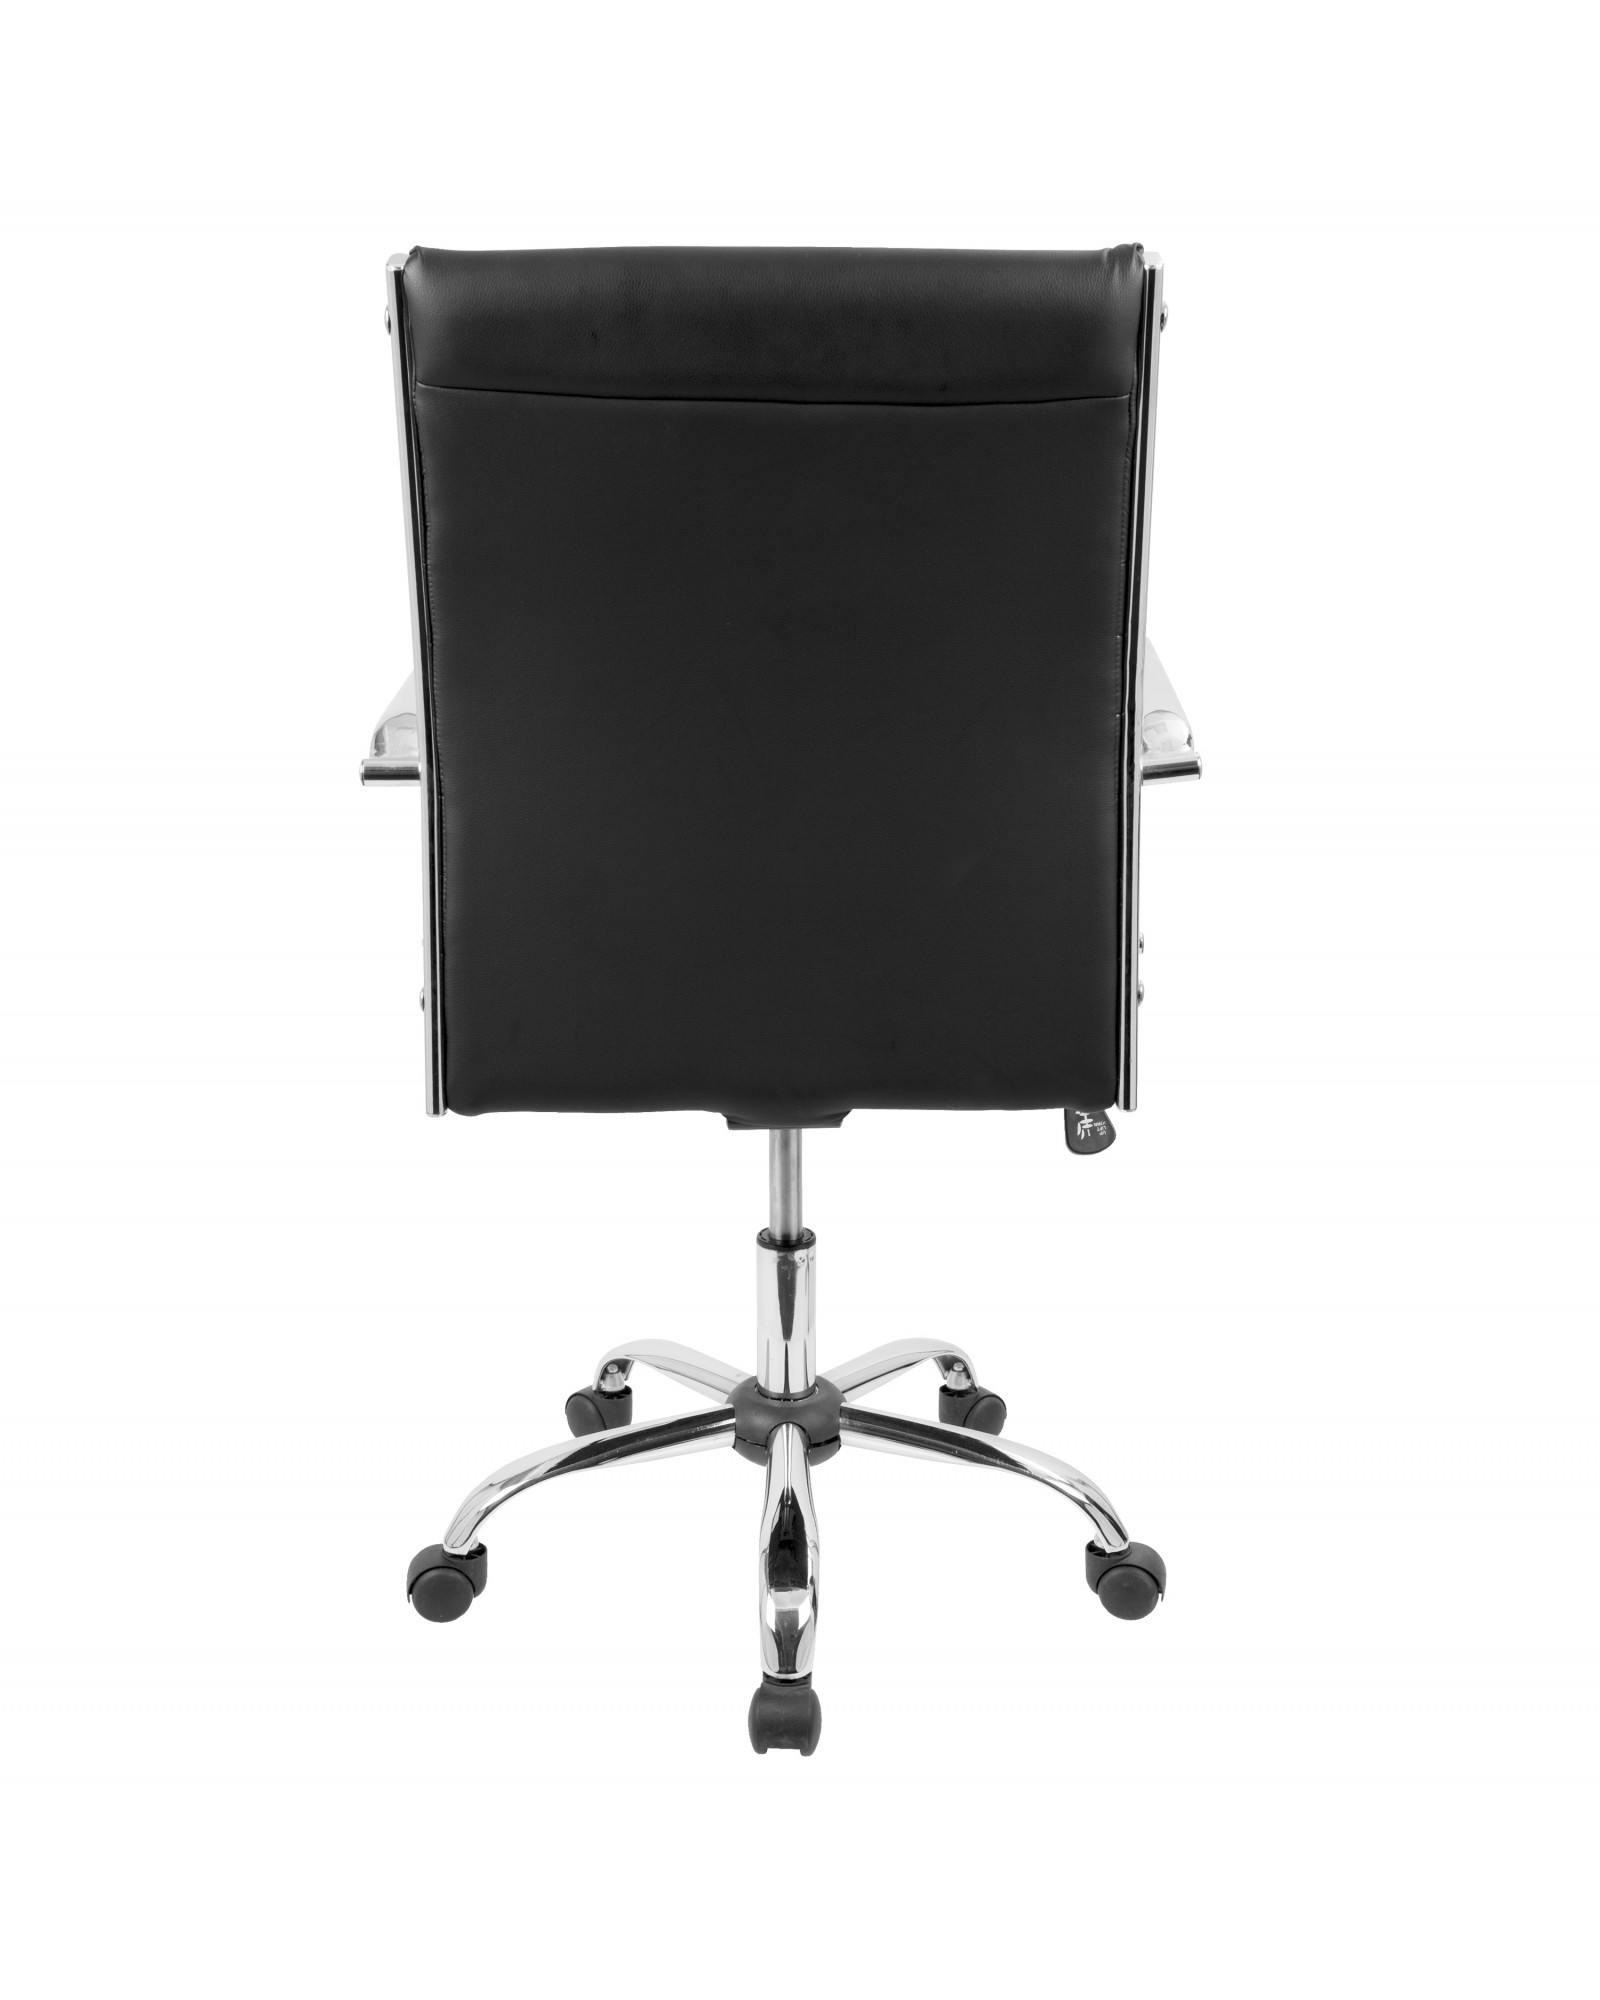 Master Contemporary Adjustable Office Chair with Swivel in Black Faux Leather